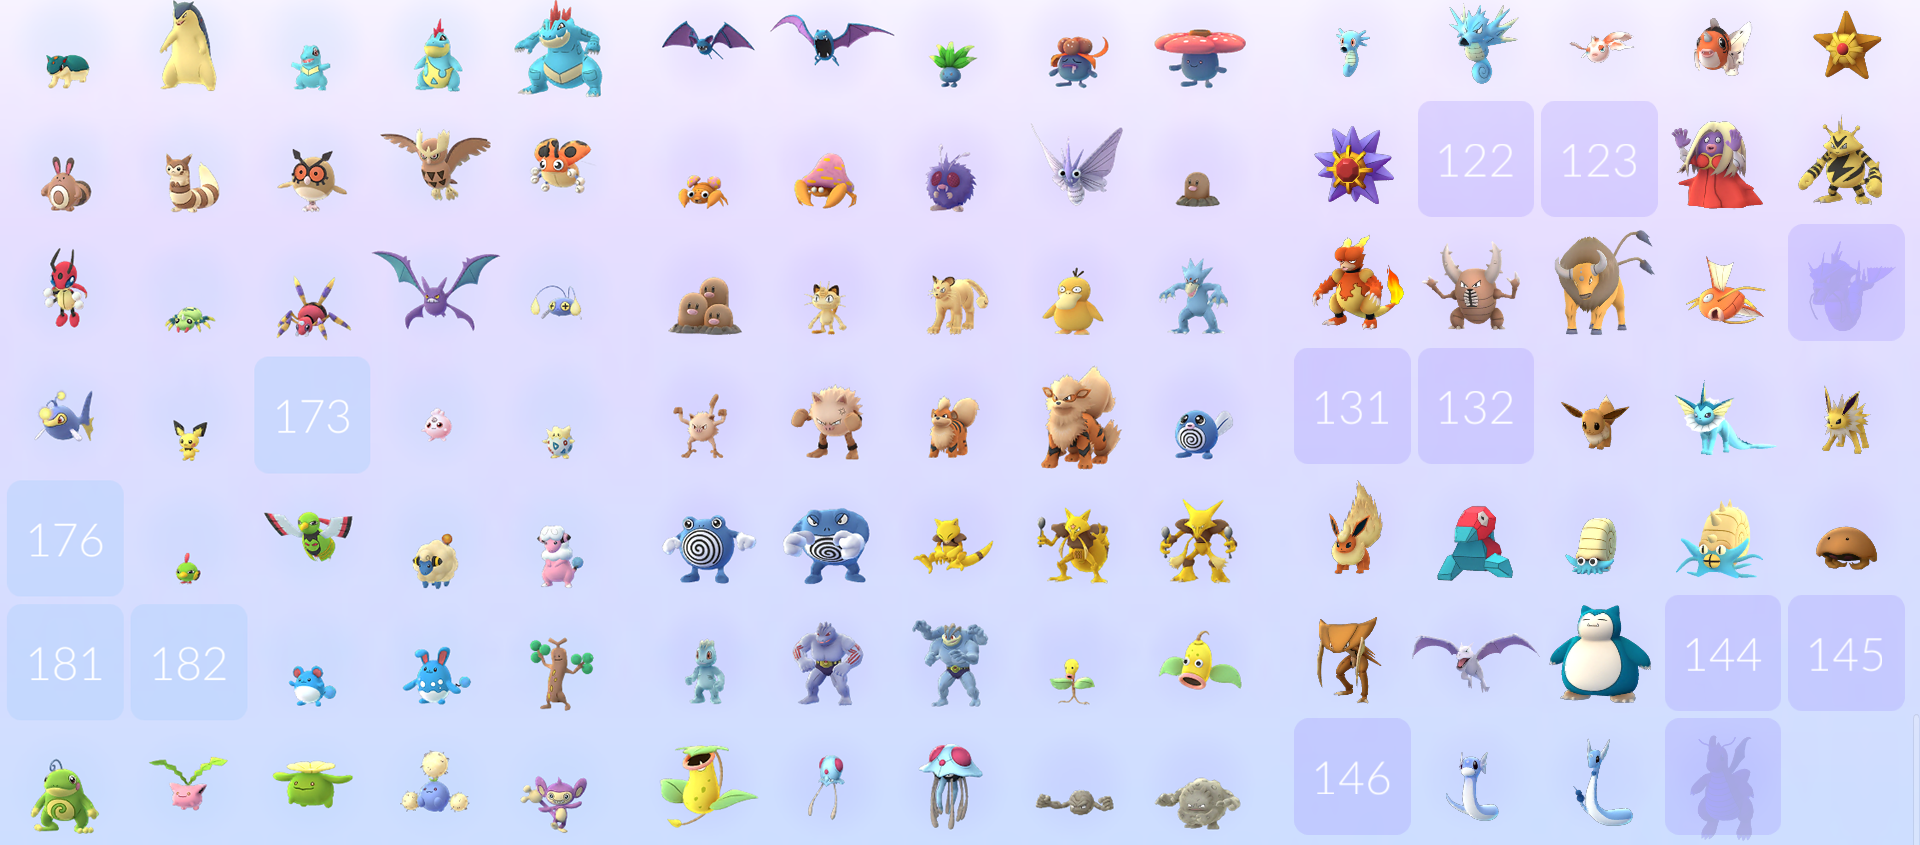 Image for Pokemon Go: how many Pokemon are there in the game's Pokedex?